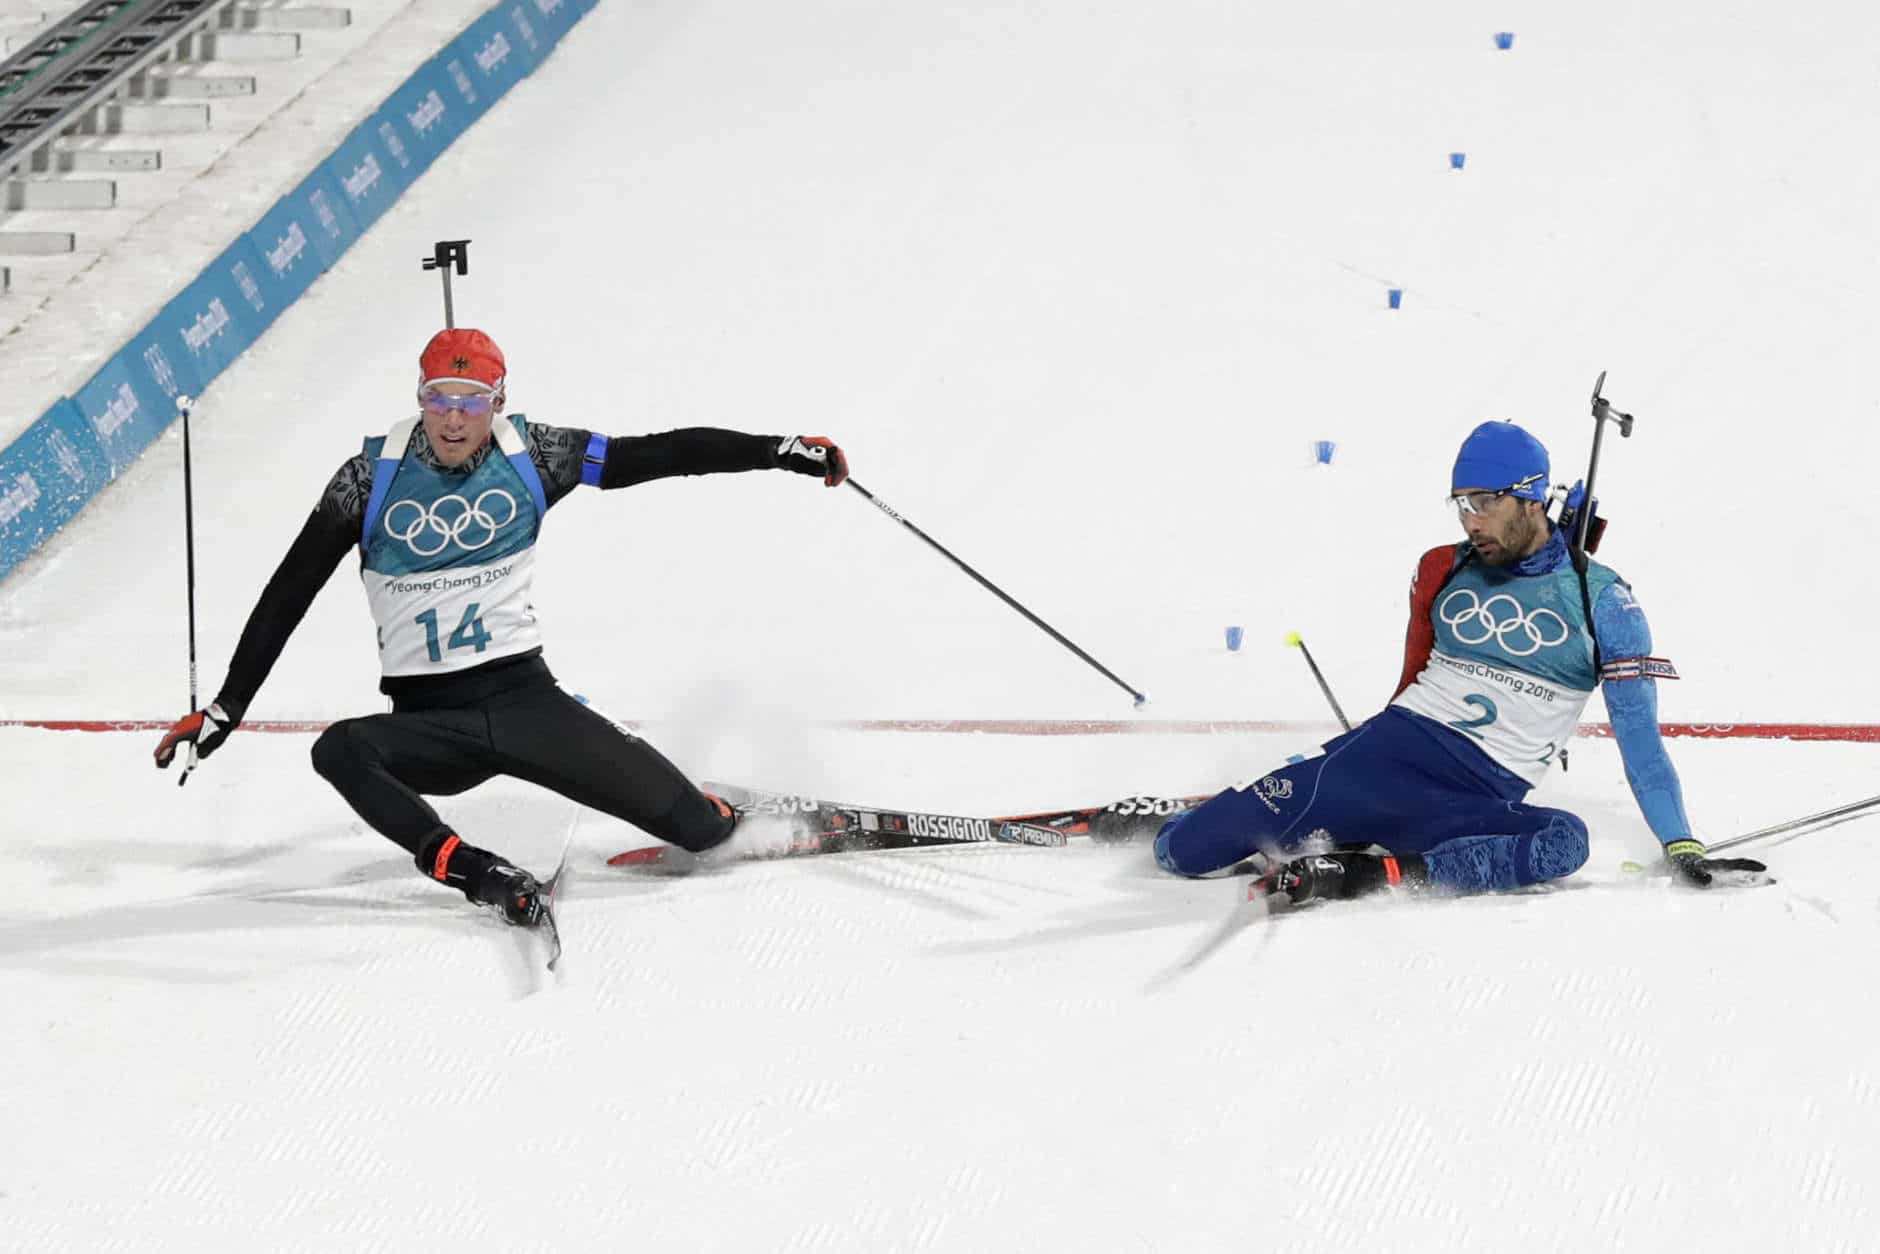 Simon Schempp, of Germany, left, and Martin Fourcade, of France, right, fall as they cross the finish line during the men's 15-kilometer mass start biathlon at the 2018 Winter Olympics in Pyeongchang, South Korea, Sunday, Feb. 18, 2018. Fourcade won the gold medal defeating Schempp in a photo finish. (AP Photo/Andrew Medichini)